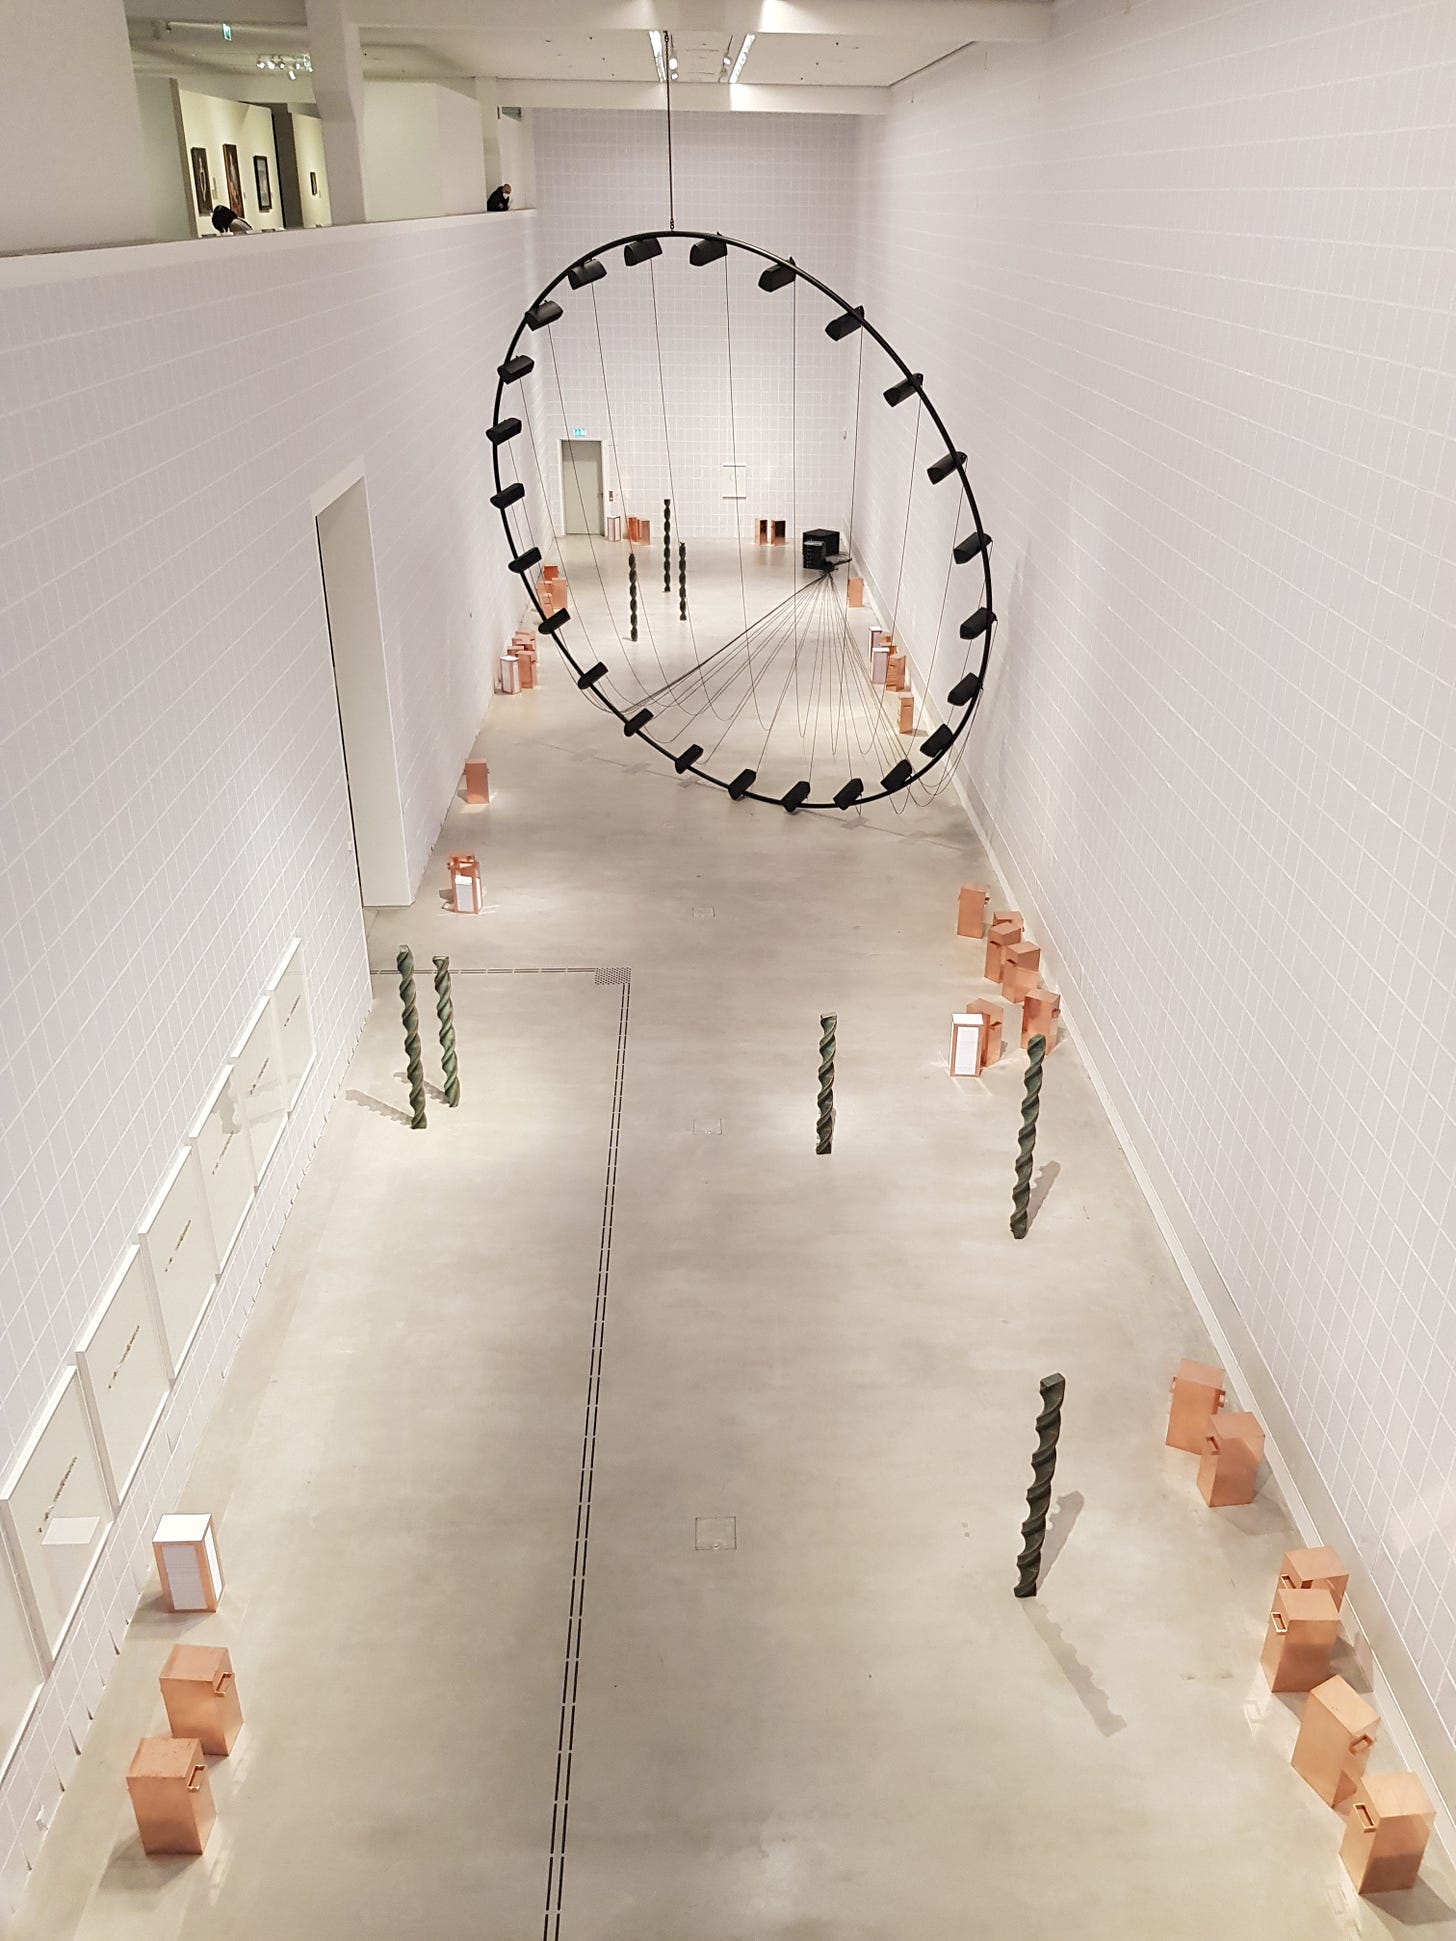 A view of an art exhibition, with a large black steel circle in the middle of the hall and other small objects around the room. The perspective is from the second floor looking down and across the space.